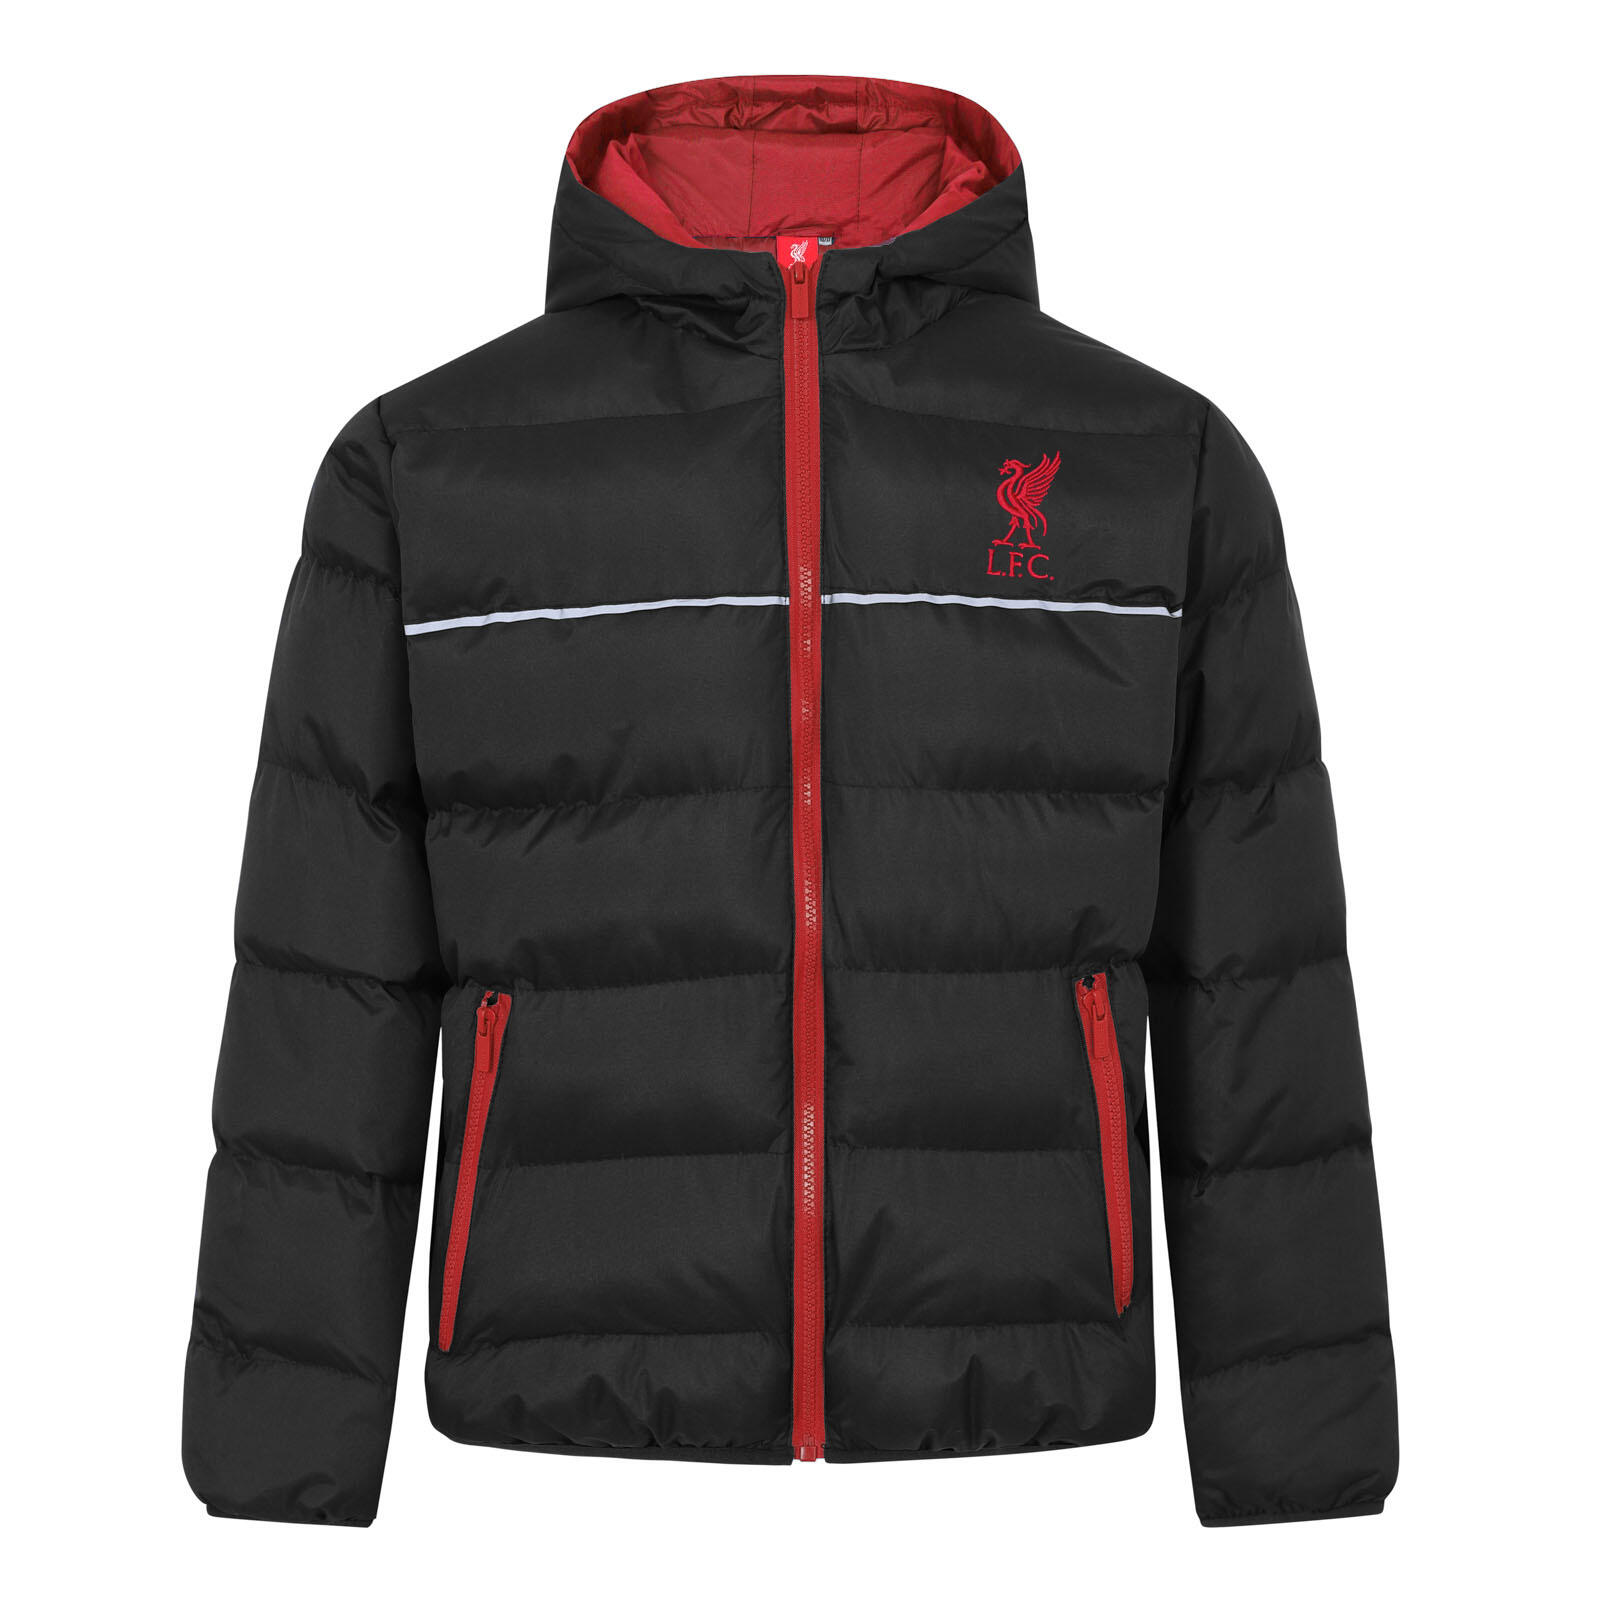 LIVERPOOL FC Liverpool FC Boys Jacket Hooded Winter Quilted Kids OFFICIAL Football Gift